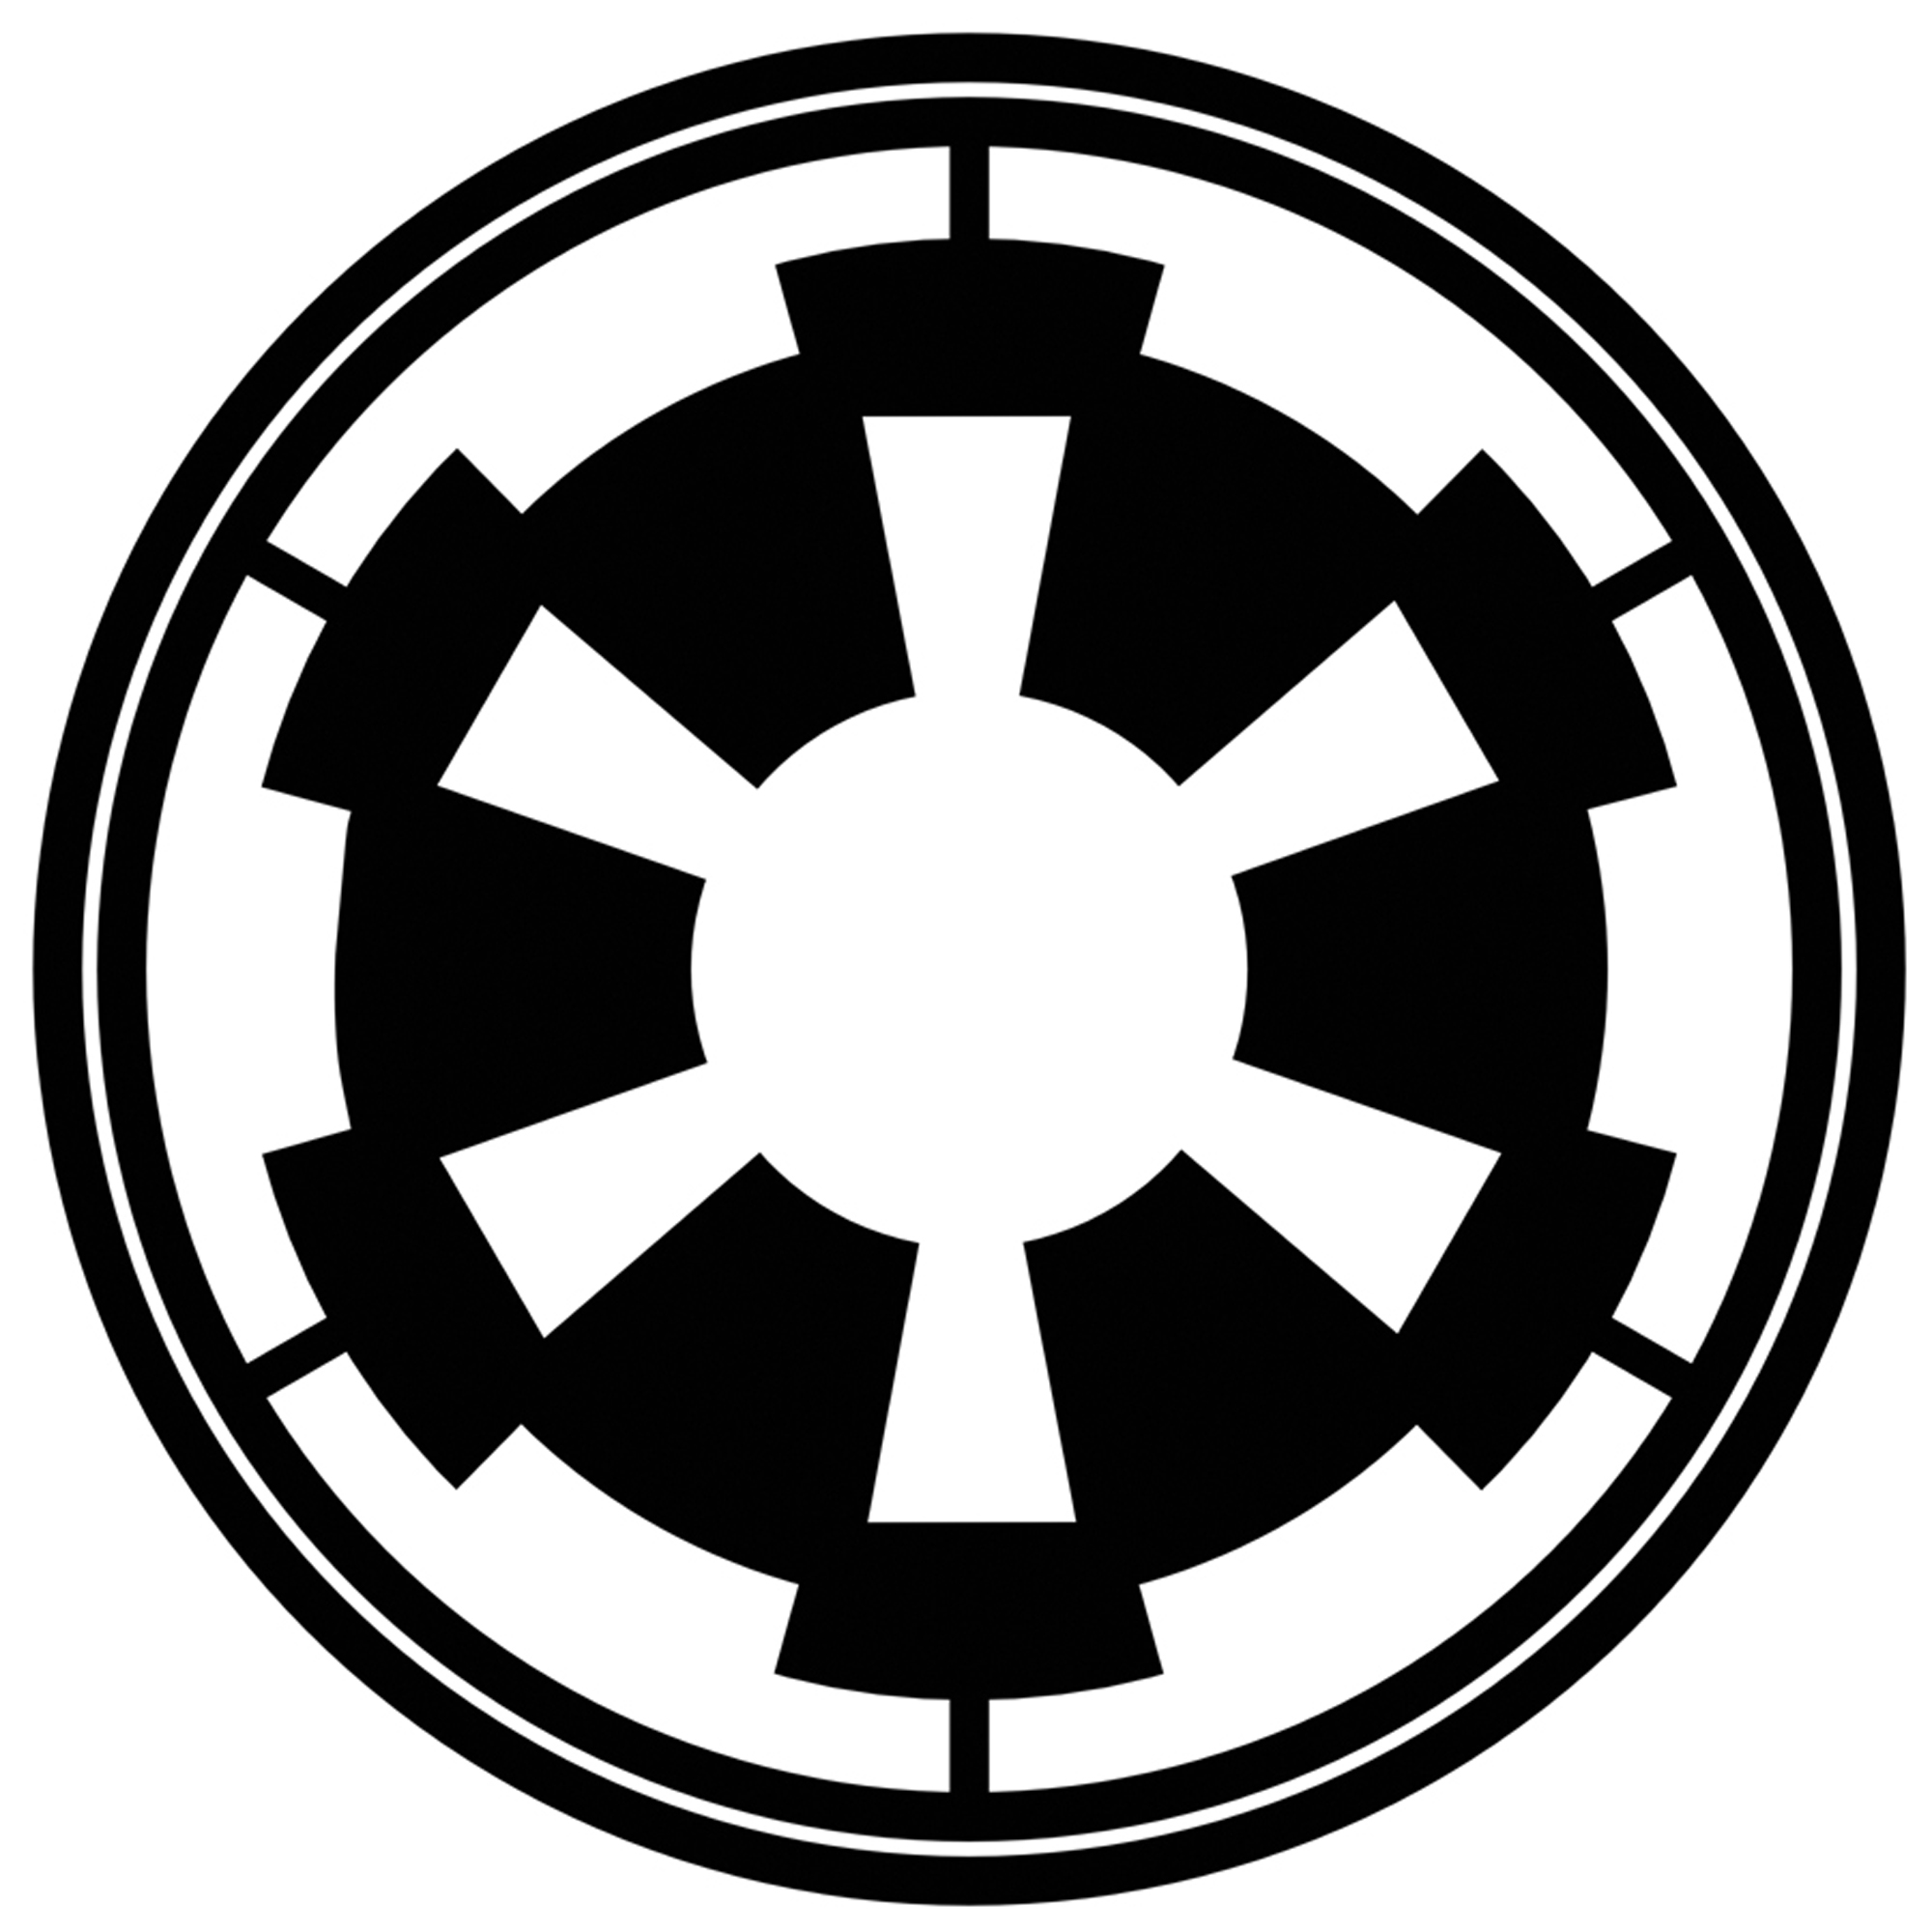 20 Imperial Symbol Star Wars Free Cliparts That You Can Download To    